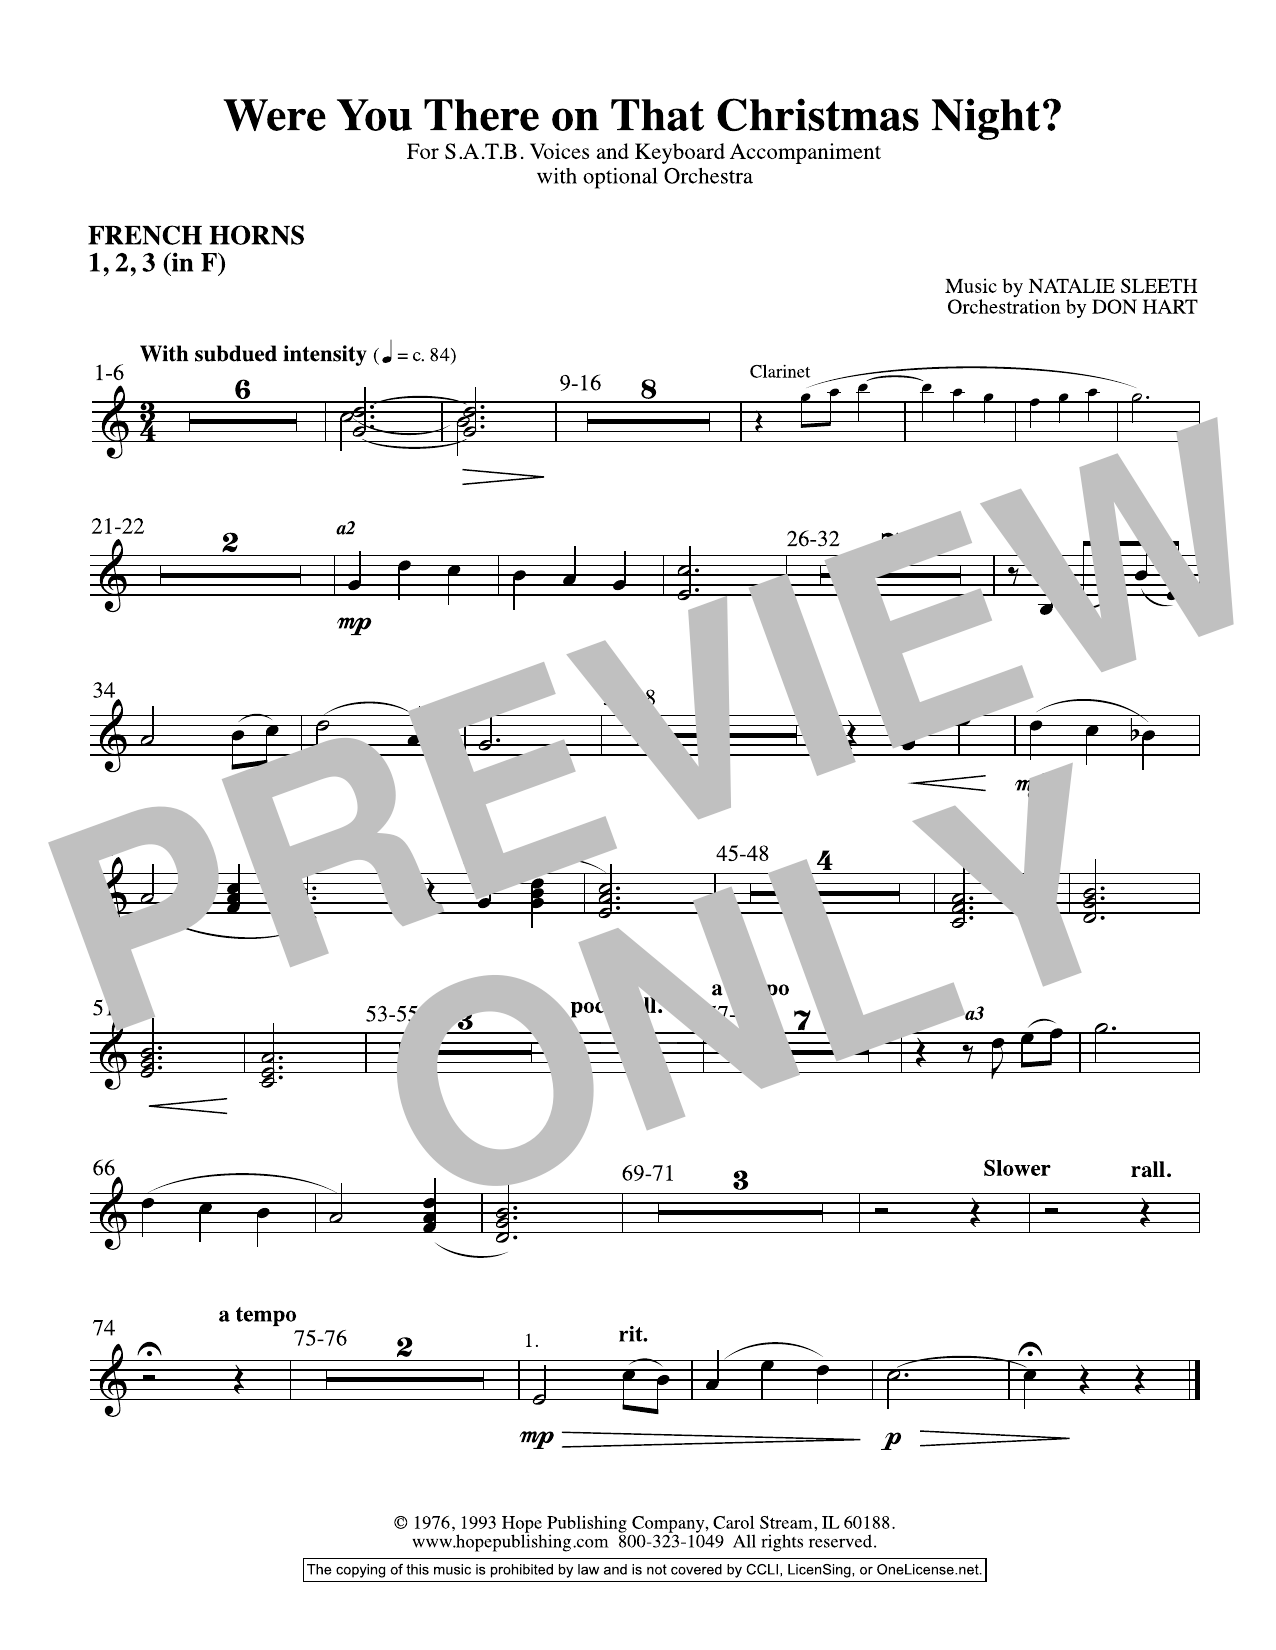 Download NATALIE SLEETH Were You There On That Christmas Night? Sheet Music